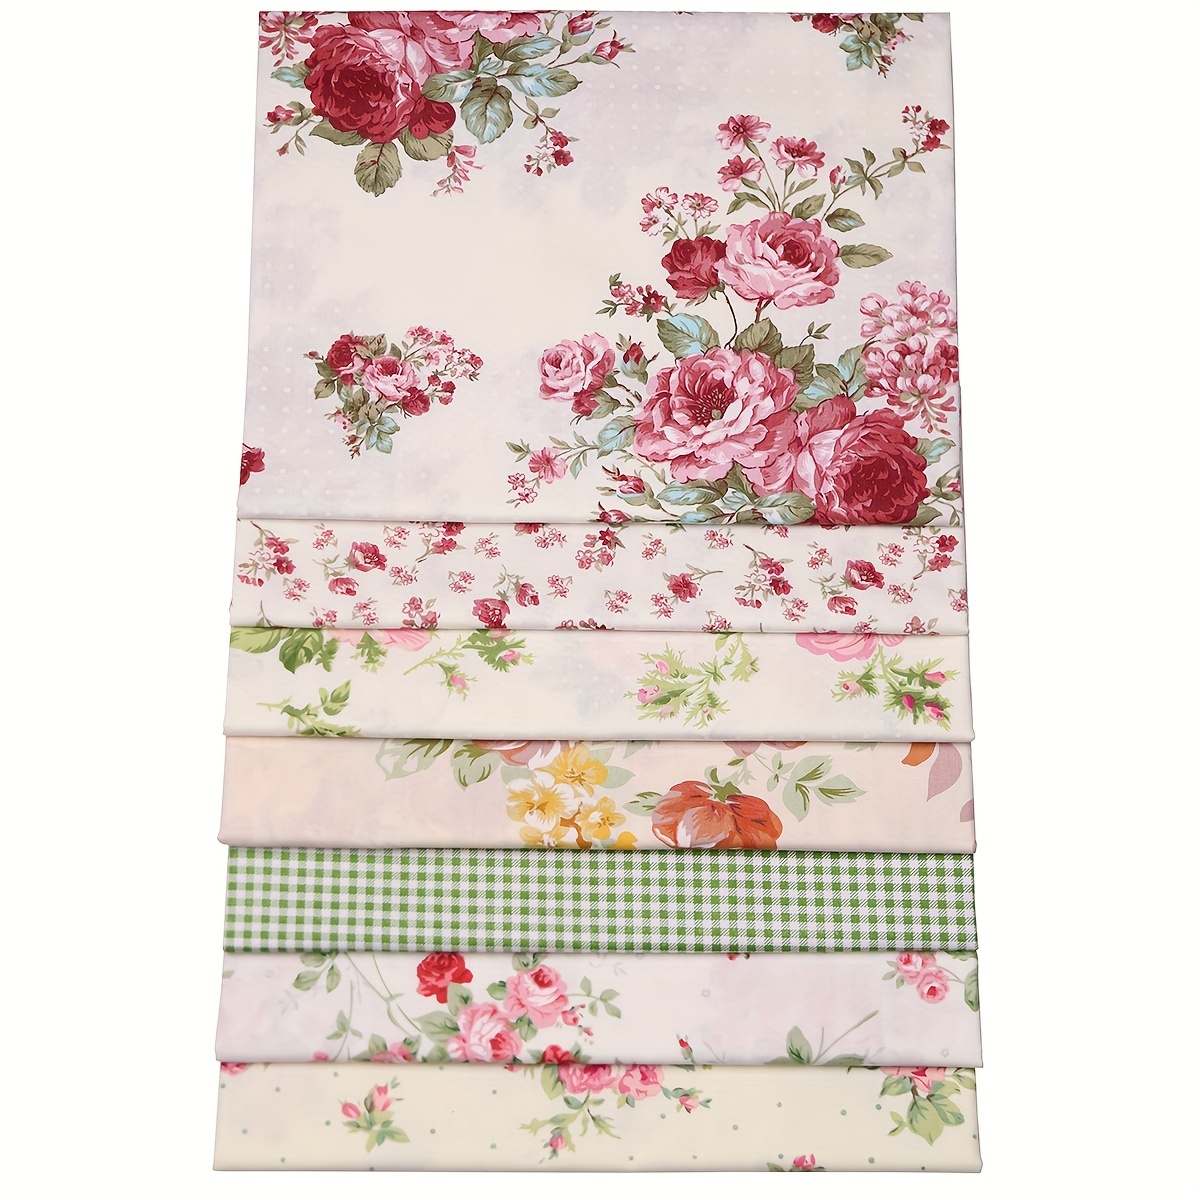 

7-piece Vintage Rose Floral Fabric Bundle - Pre-cut Cotton Quarters For Quilting, Sewing & Diy Crafts - Ideal For Patchwork, Home Decor & Party Supplies - Hand Wash Only - 15.75 X 19.69 Inches